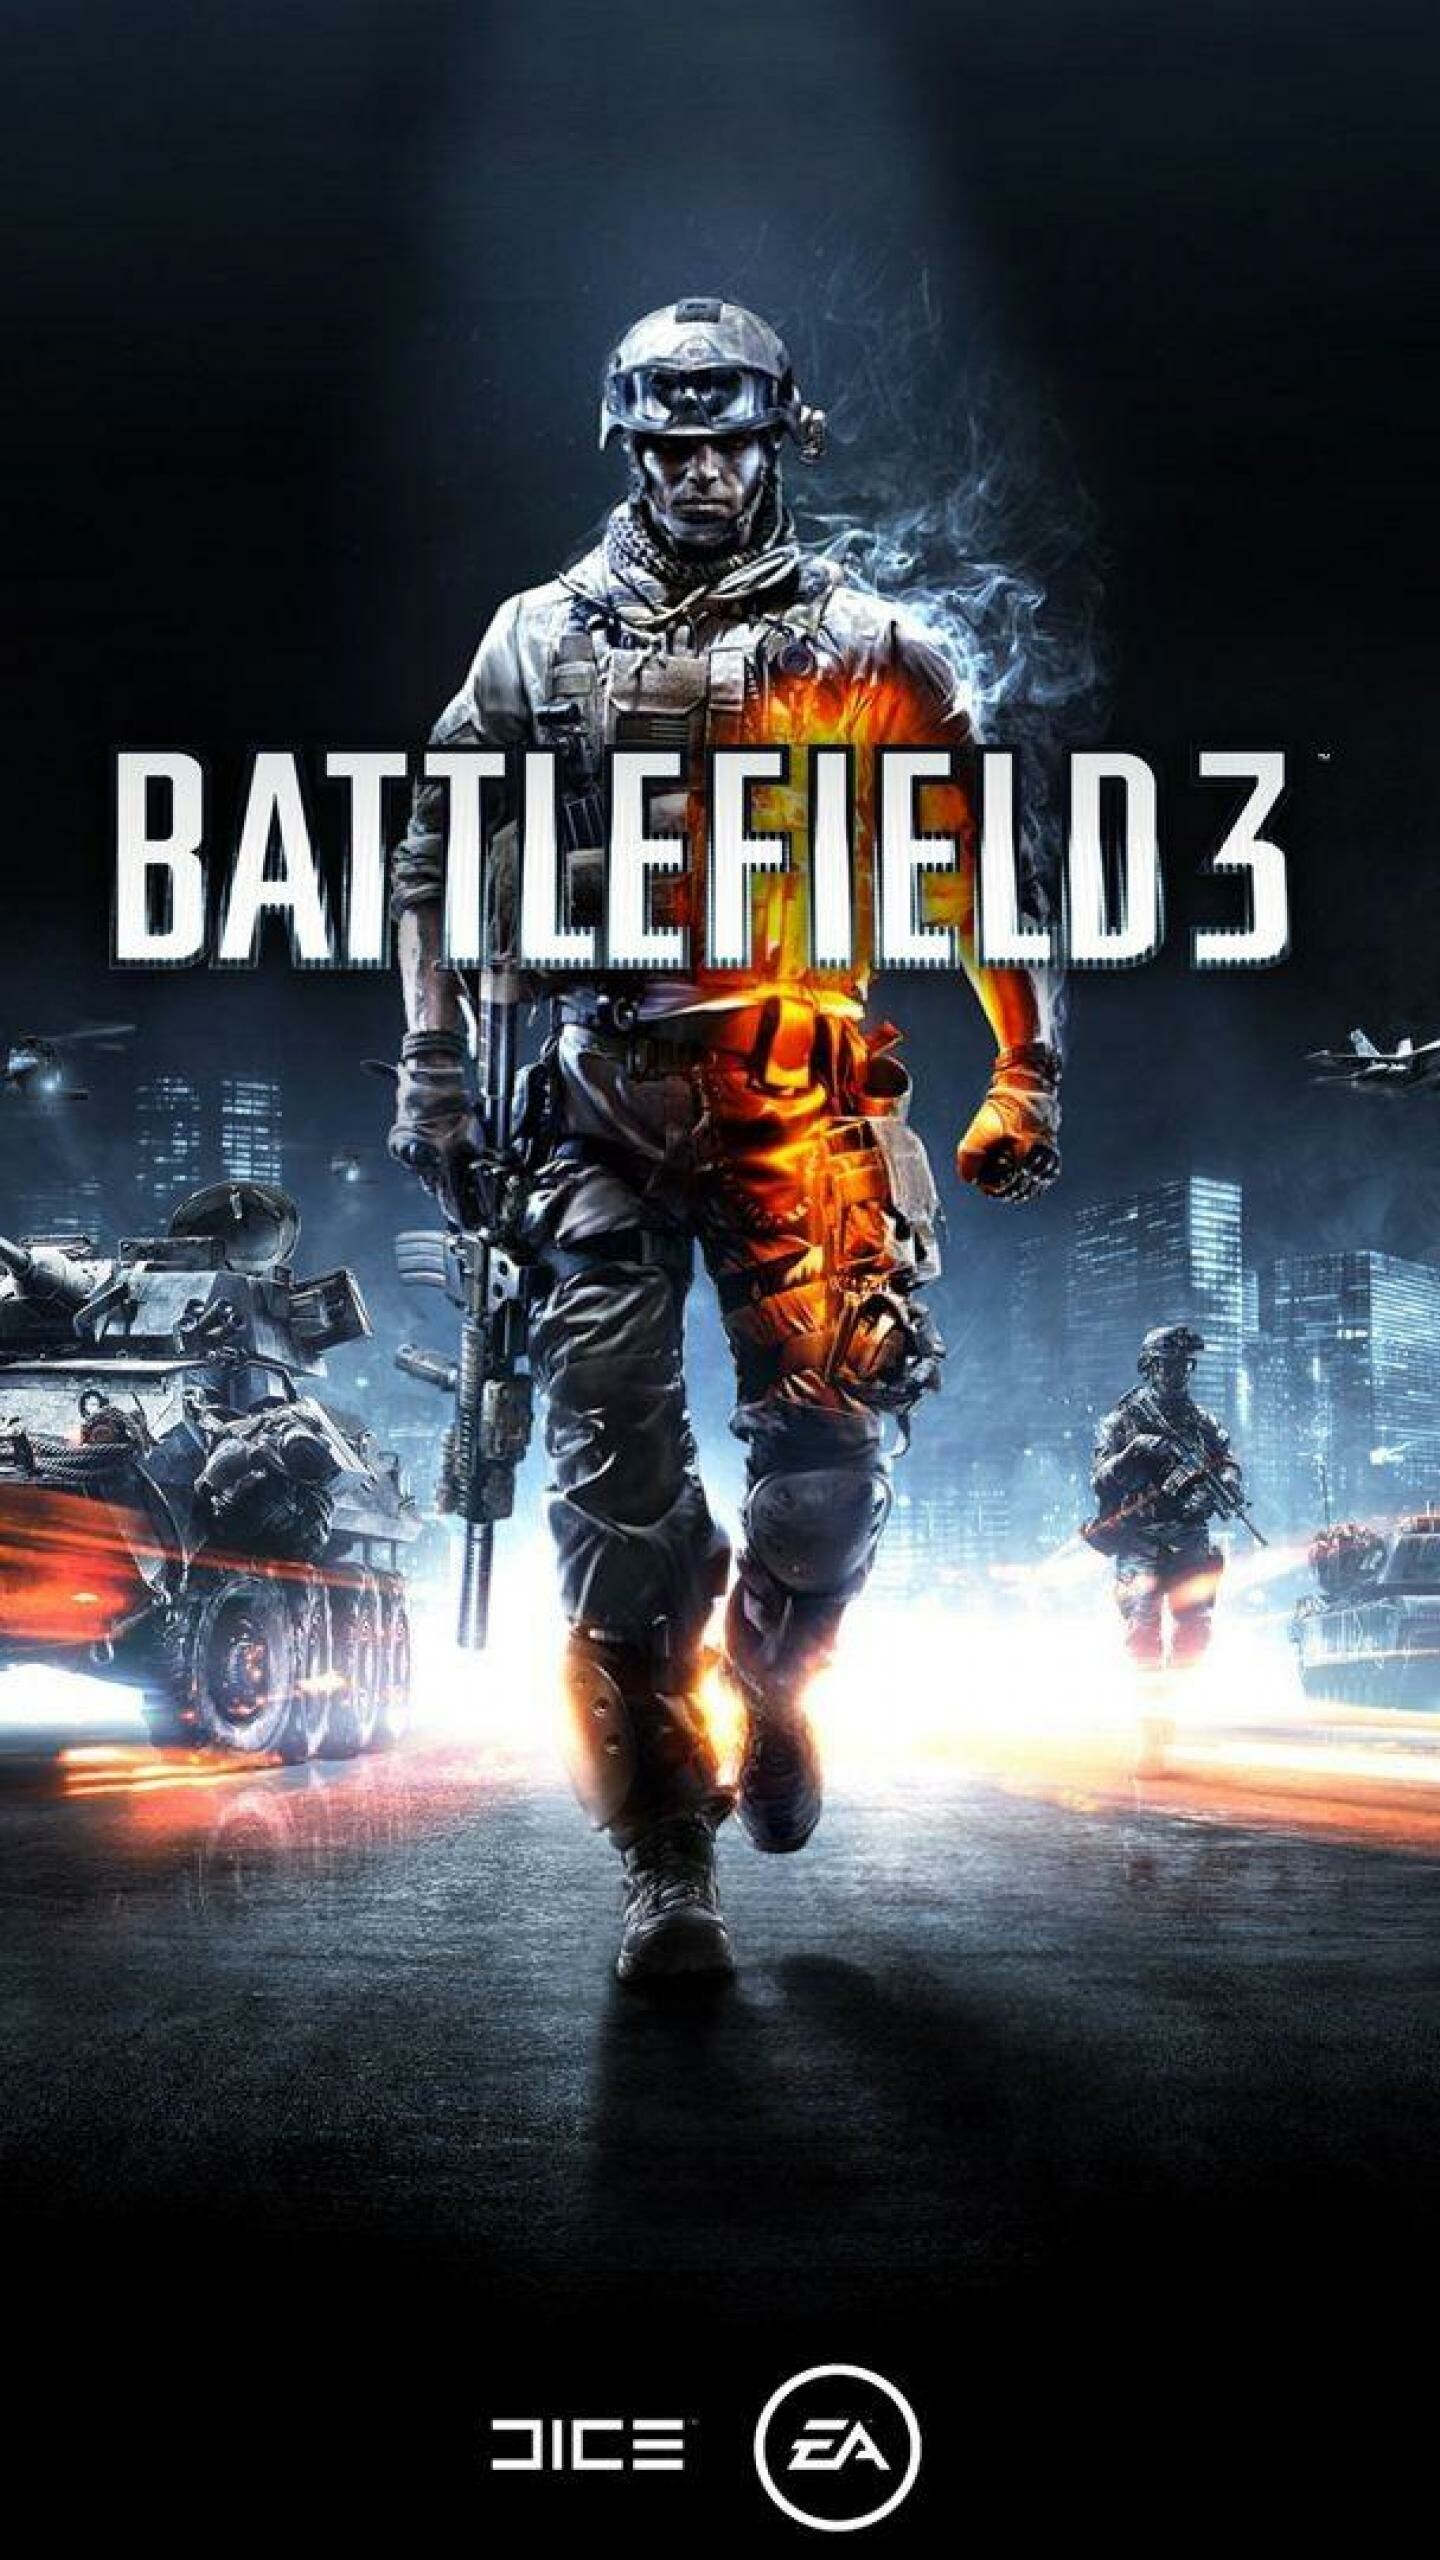 Battlefield 3: Campaign story, set during the fictional “War of 2014” and covers events that occur over the span of nine months. 1440x2560 HD Wallpaper.